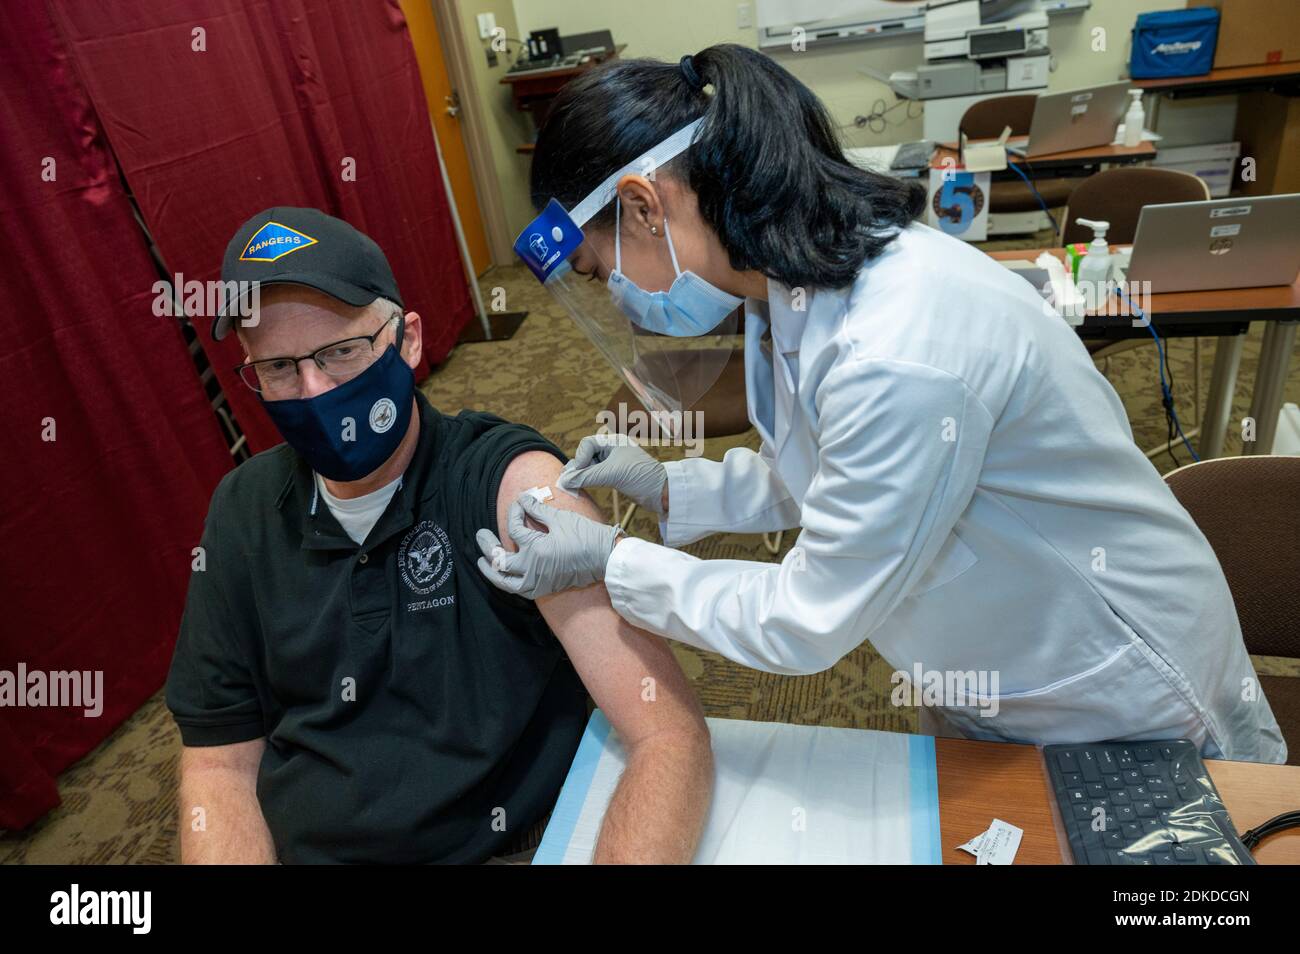 Bethesda, United States. 14th Dec, 2020. U.S. Acting Defense Secretary Chris Miller receives one of the first Pfizer COVID-19 vaccinations at Walter Reed National Military Medical Center December 14, 2020 in Bethesda, Maryland. Credit: Lisa Ferdinando/DOD/Alamy Live News Stock Photo